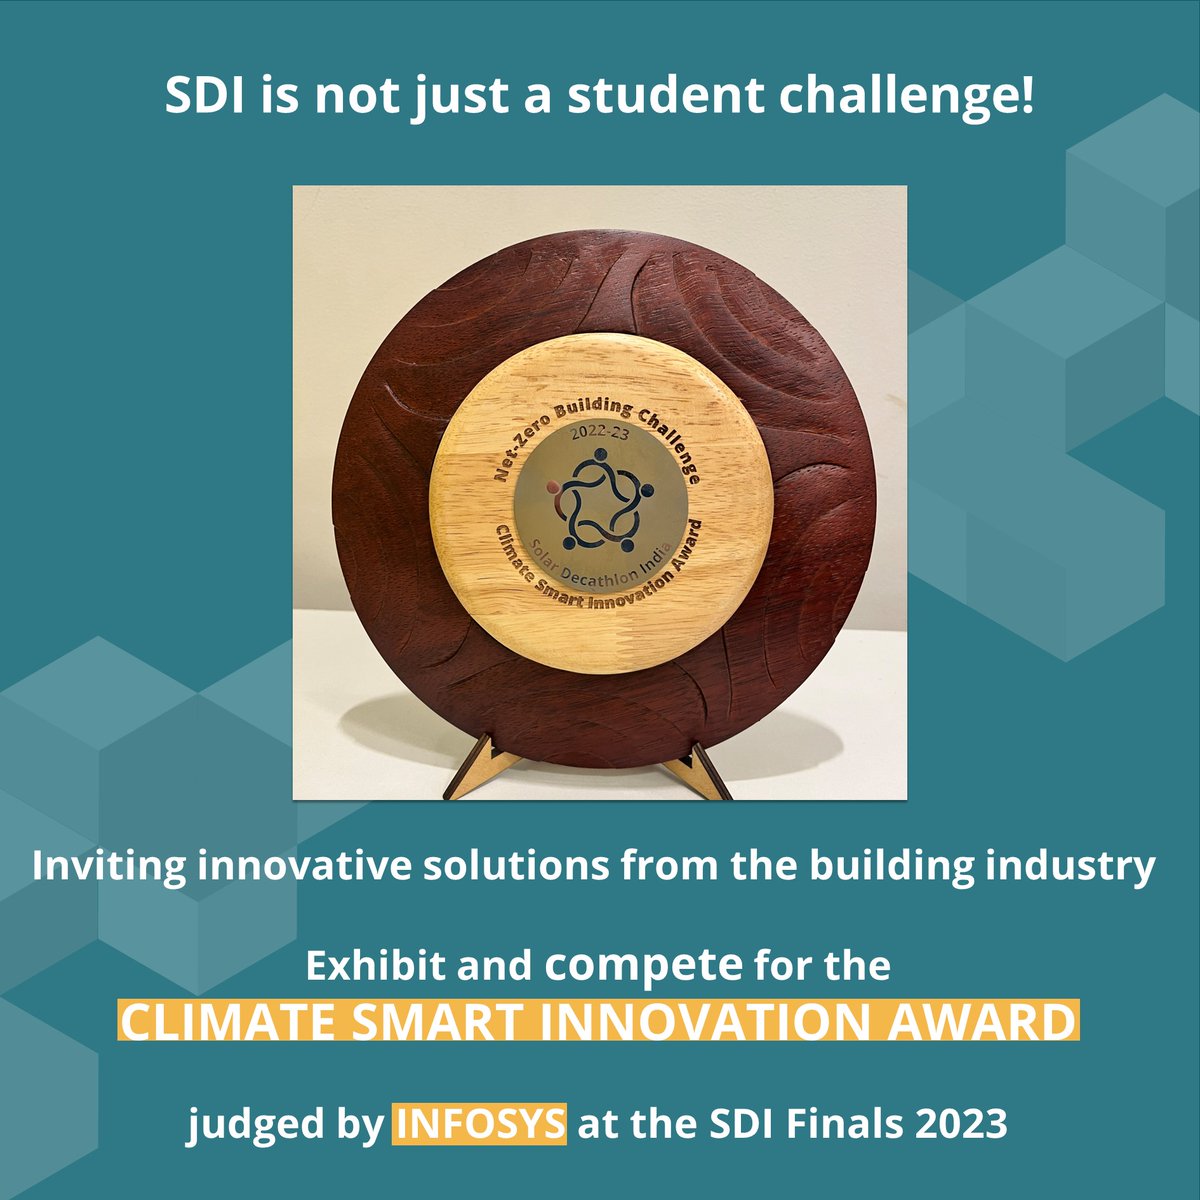 At the Finals 2023, a Building Industry #Innovation Exhibit will be organized where industry professionals will exhibit innovative building solutions. Apply to be part of the #BuildingIndustry Exhibit at the SDI Finals. 

docs.google.com/forms/d/e/1FAI…
 
#Product #material #materials